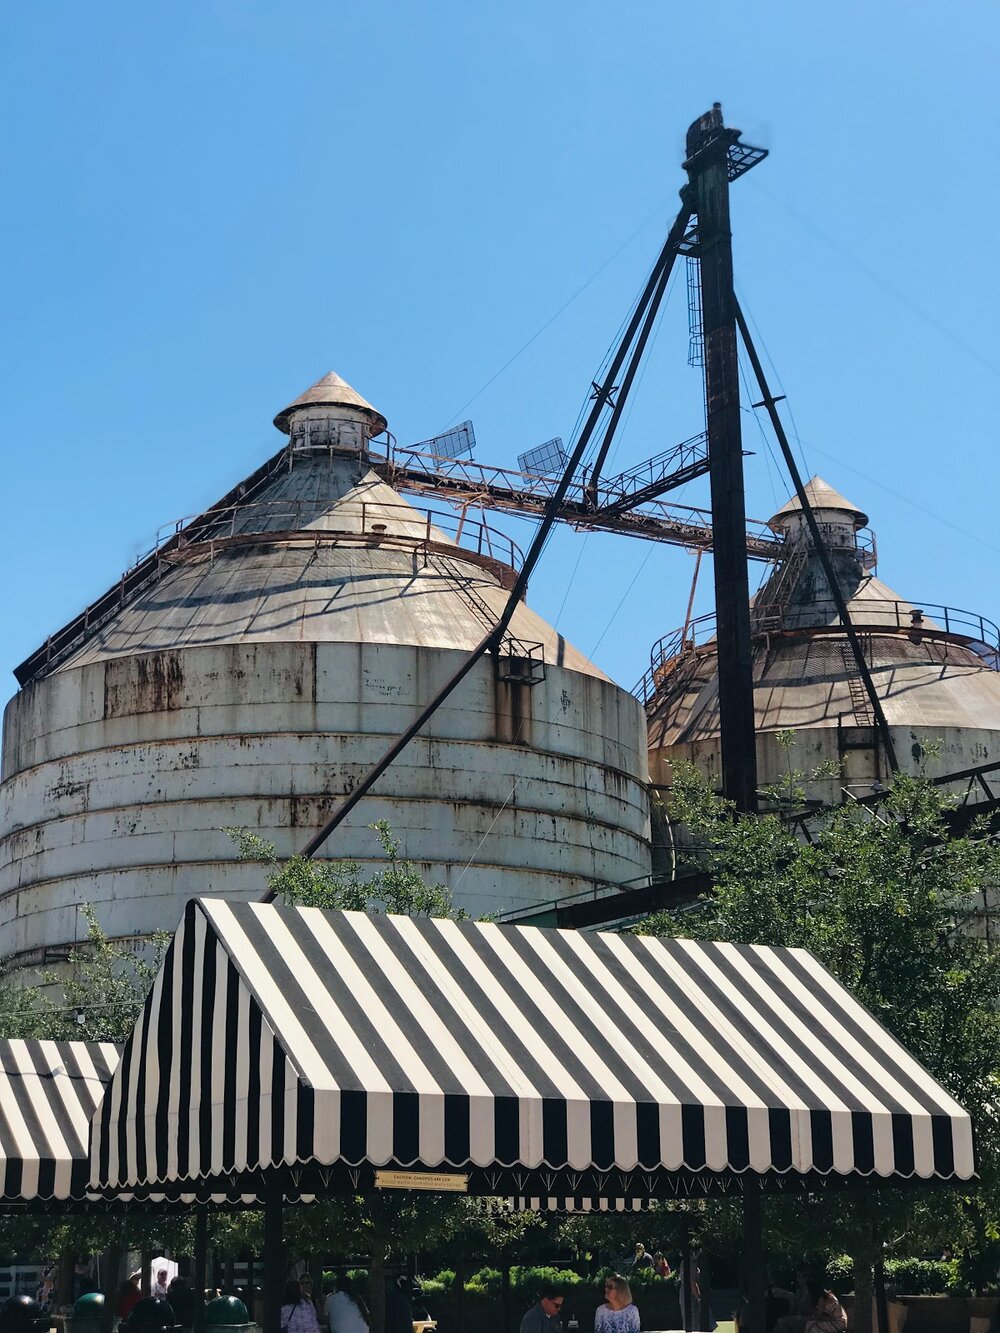 Our Fun Weekend Visiting Magnolia Market In Waco, Texas: Yummy Cupcakes, Shopping And More!